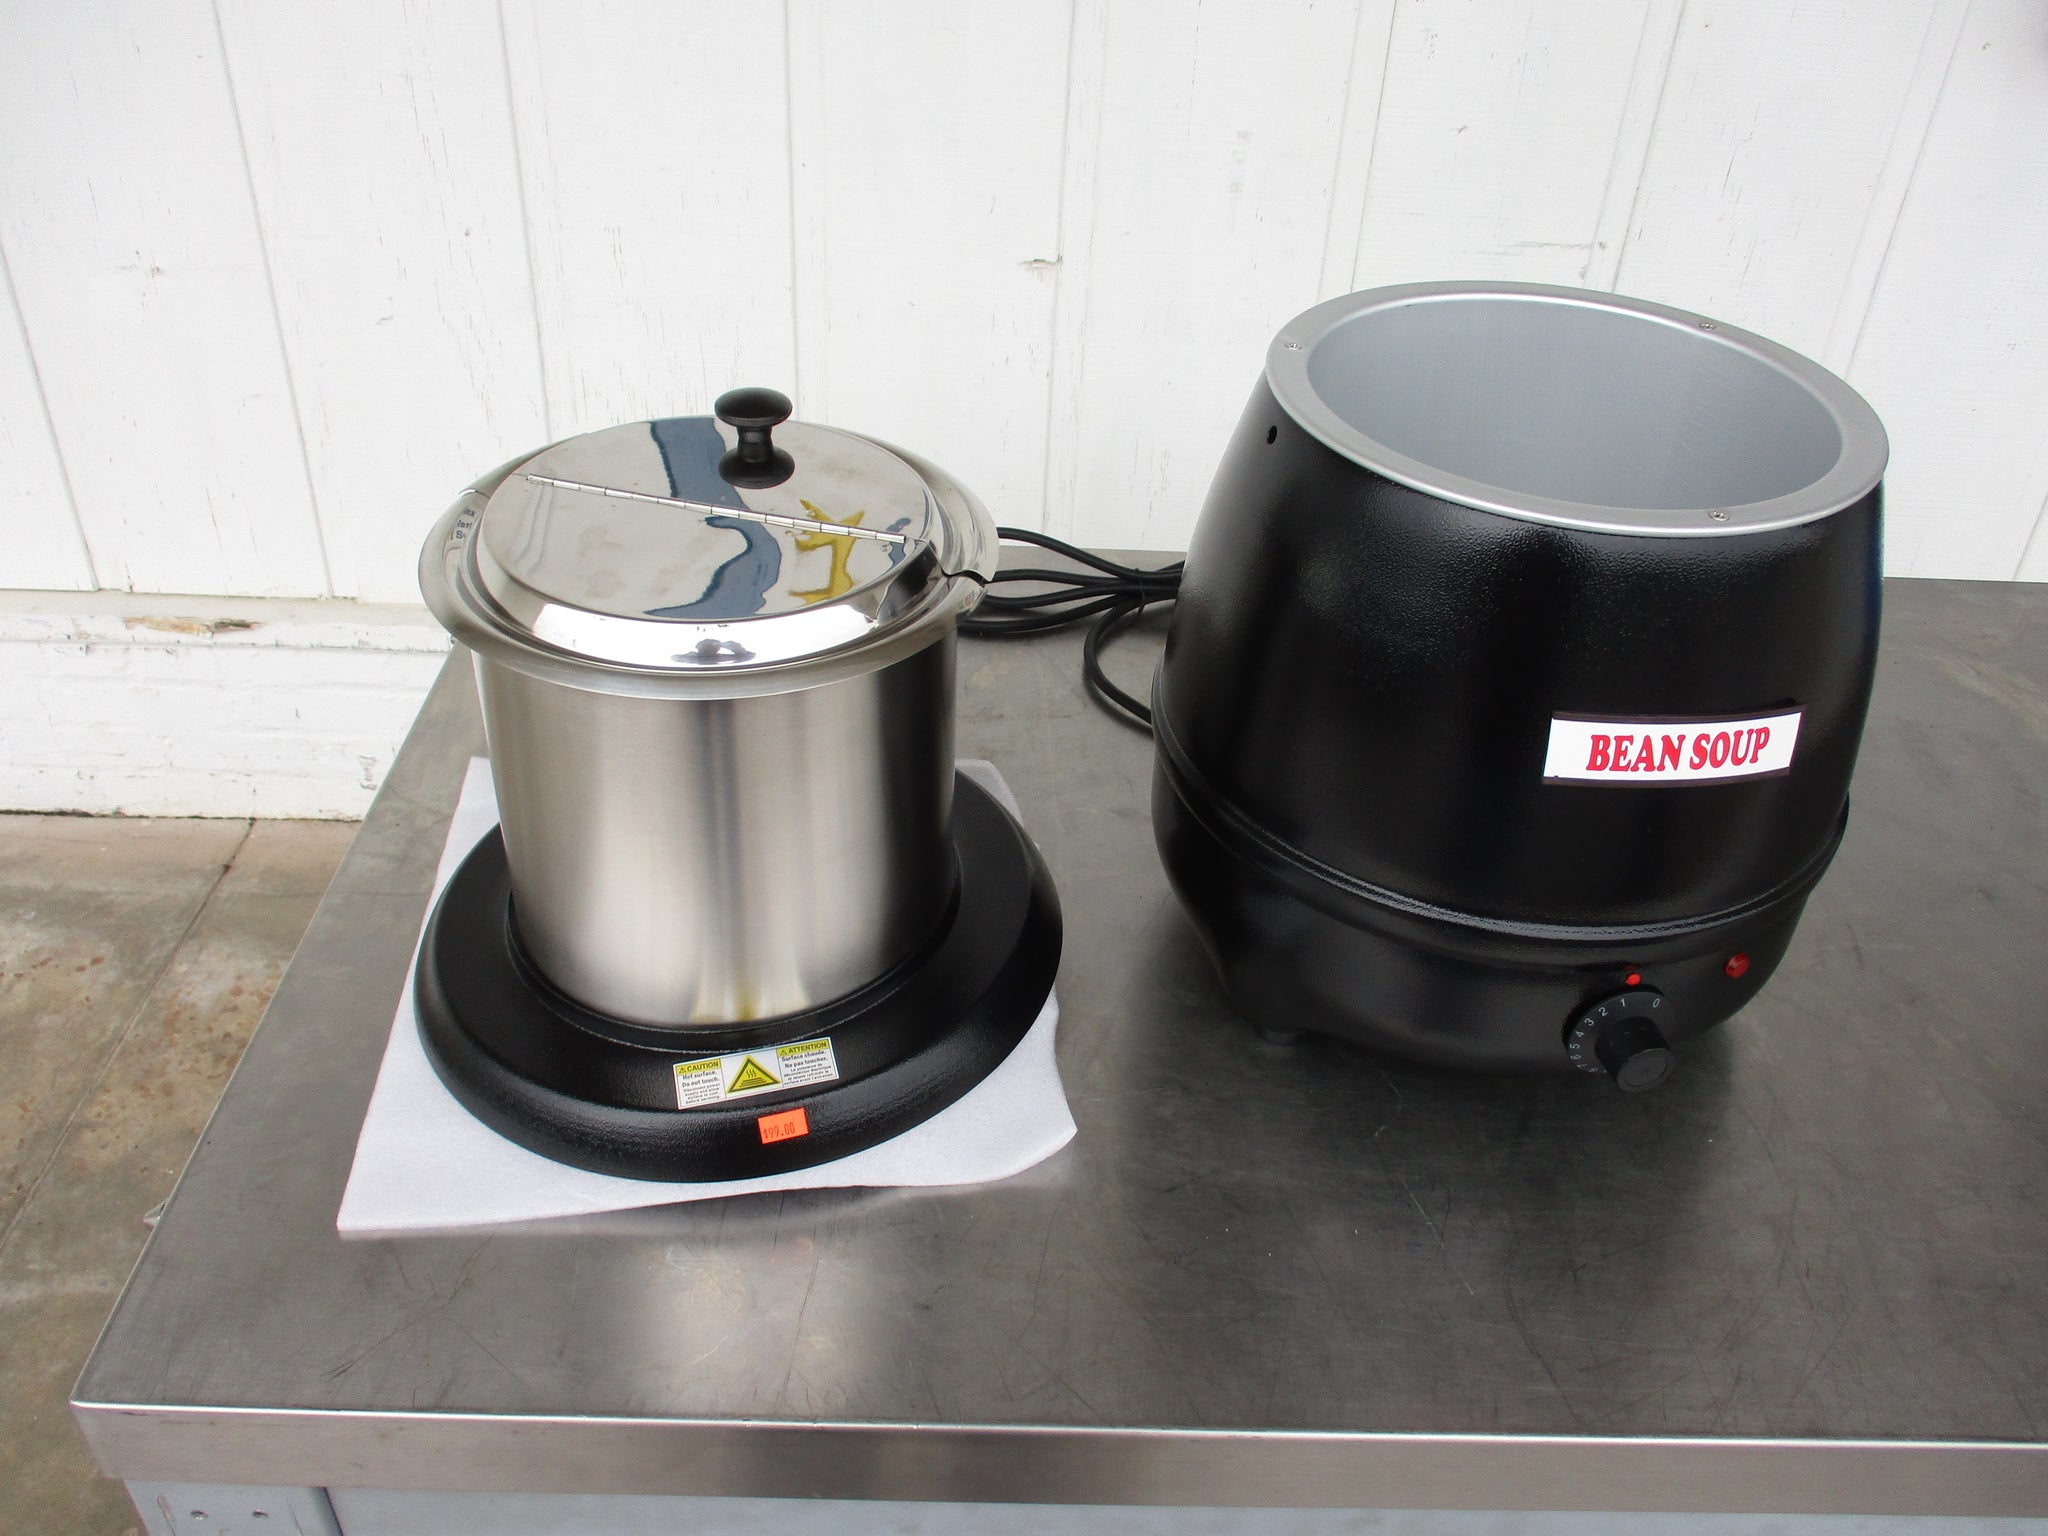 NEW Winco ESW-66 10-1/2 qt Electric 120v Soup Kettle/Warmer